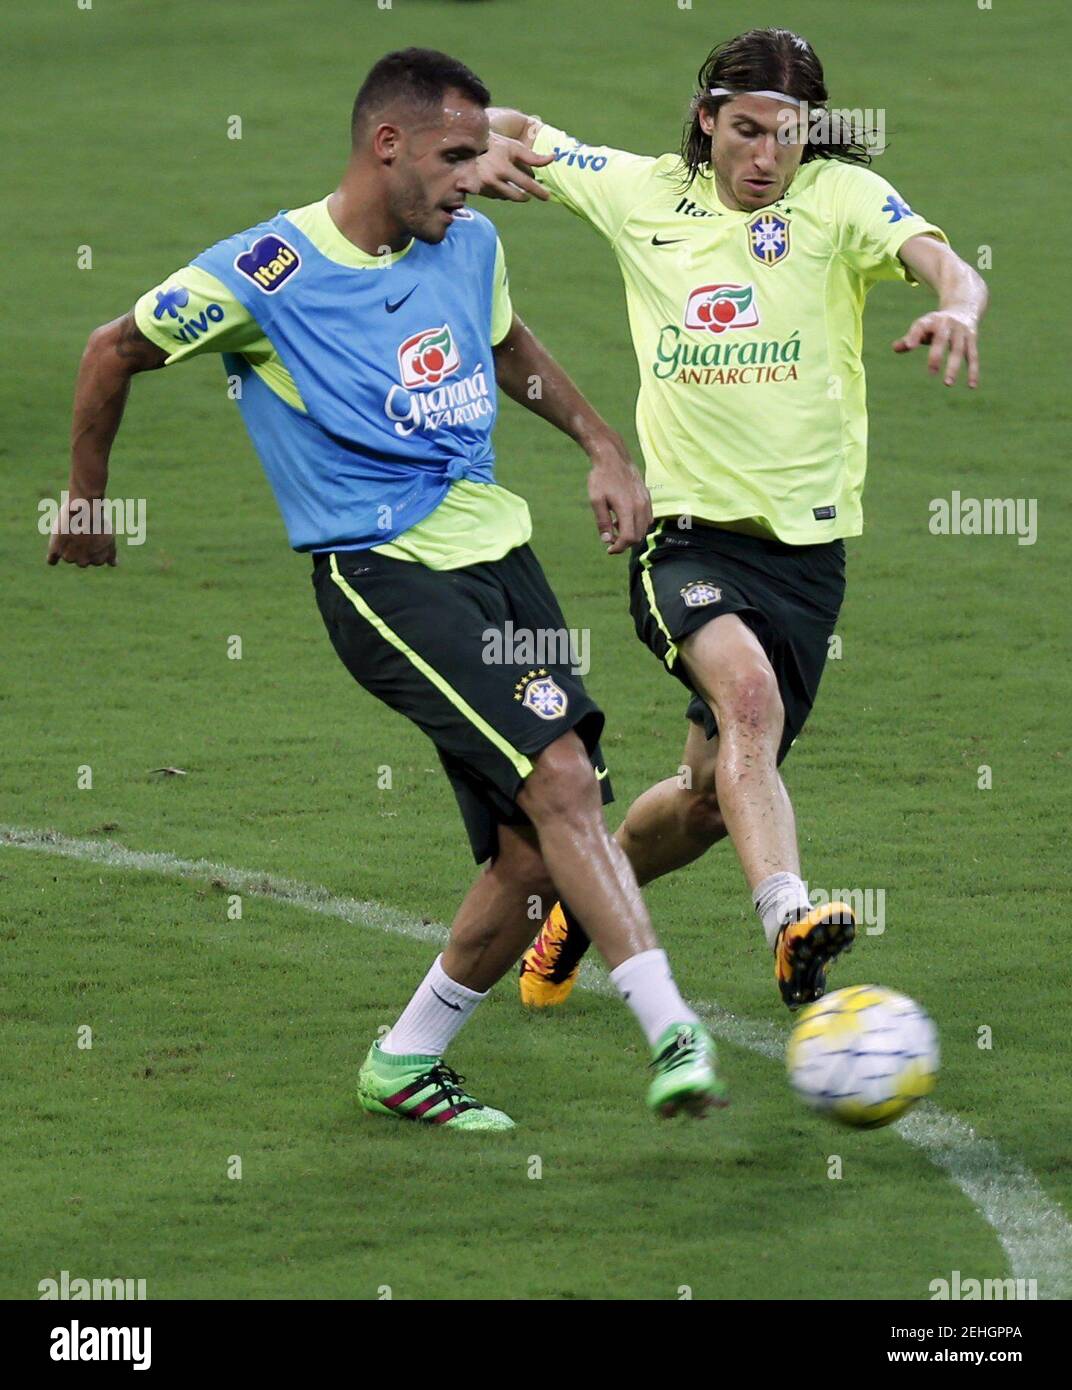 Football Soccer - Brazil training session - World Cup 2018 qualifier - Recife, Brazil- 24/3/16 Filipe Luis (R) in action with Renato Augusto during a training session during a training session ahead of World Cup 2018 qualifier match against Uruguay. REUTERS/Paulo Whitaker   Picture Supplied by Action Images Stock Photo